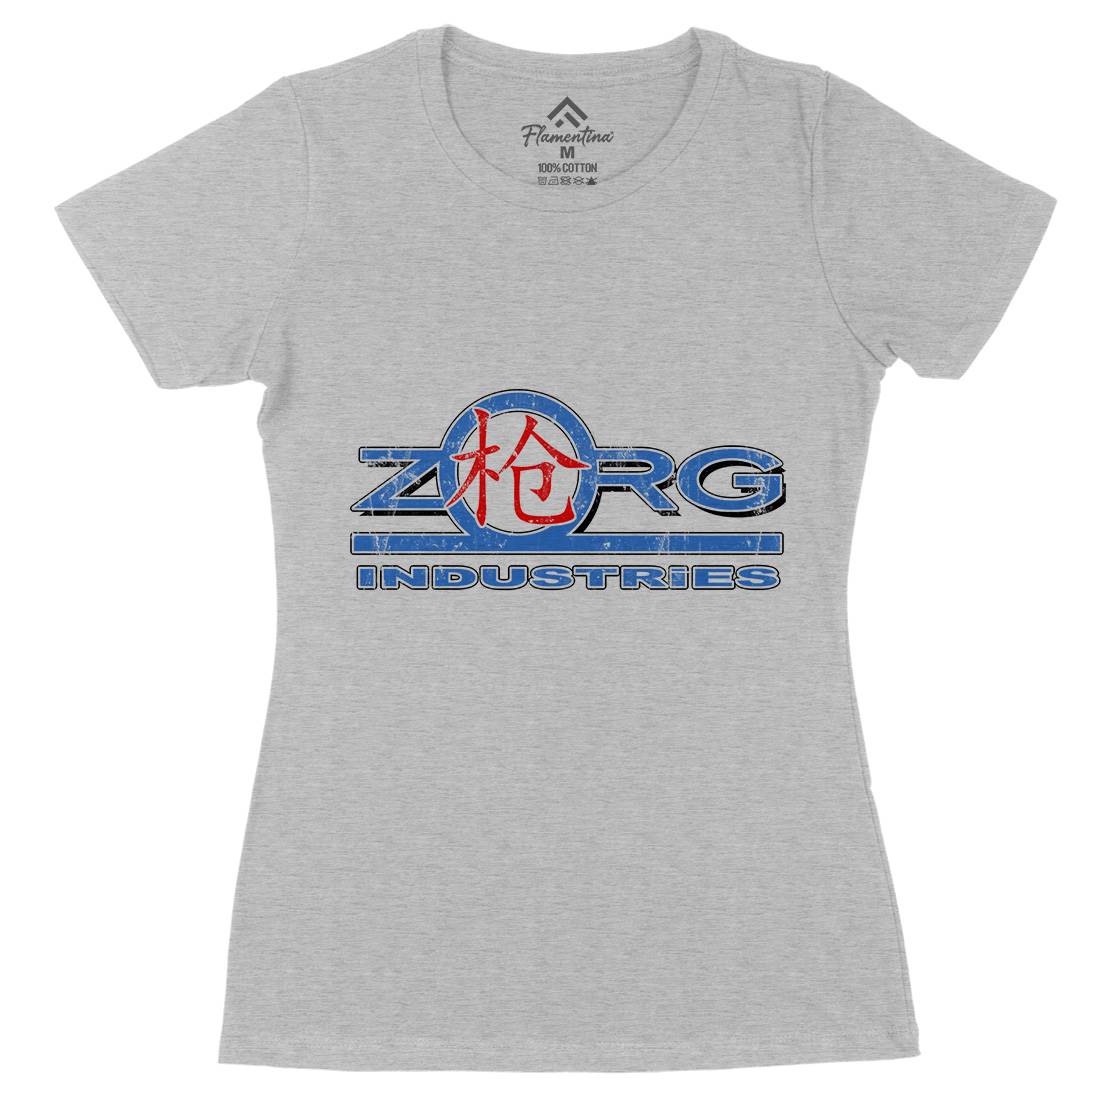 Zorg Ind Womens Organic Crew Neck T-Shirt Space D105